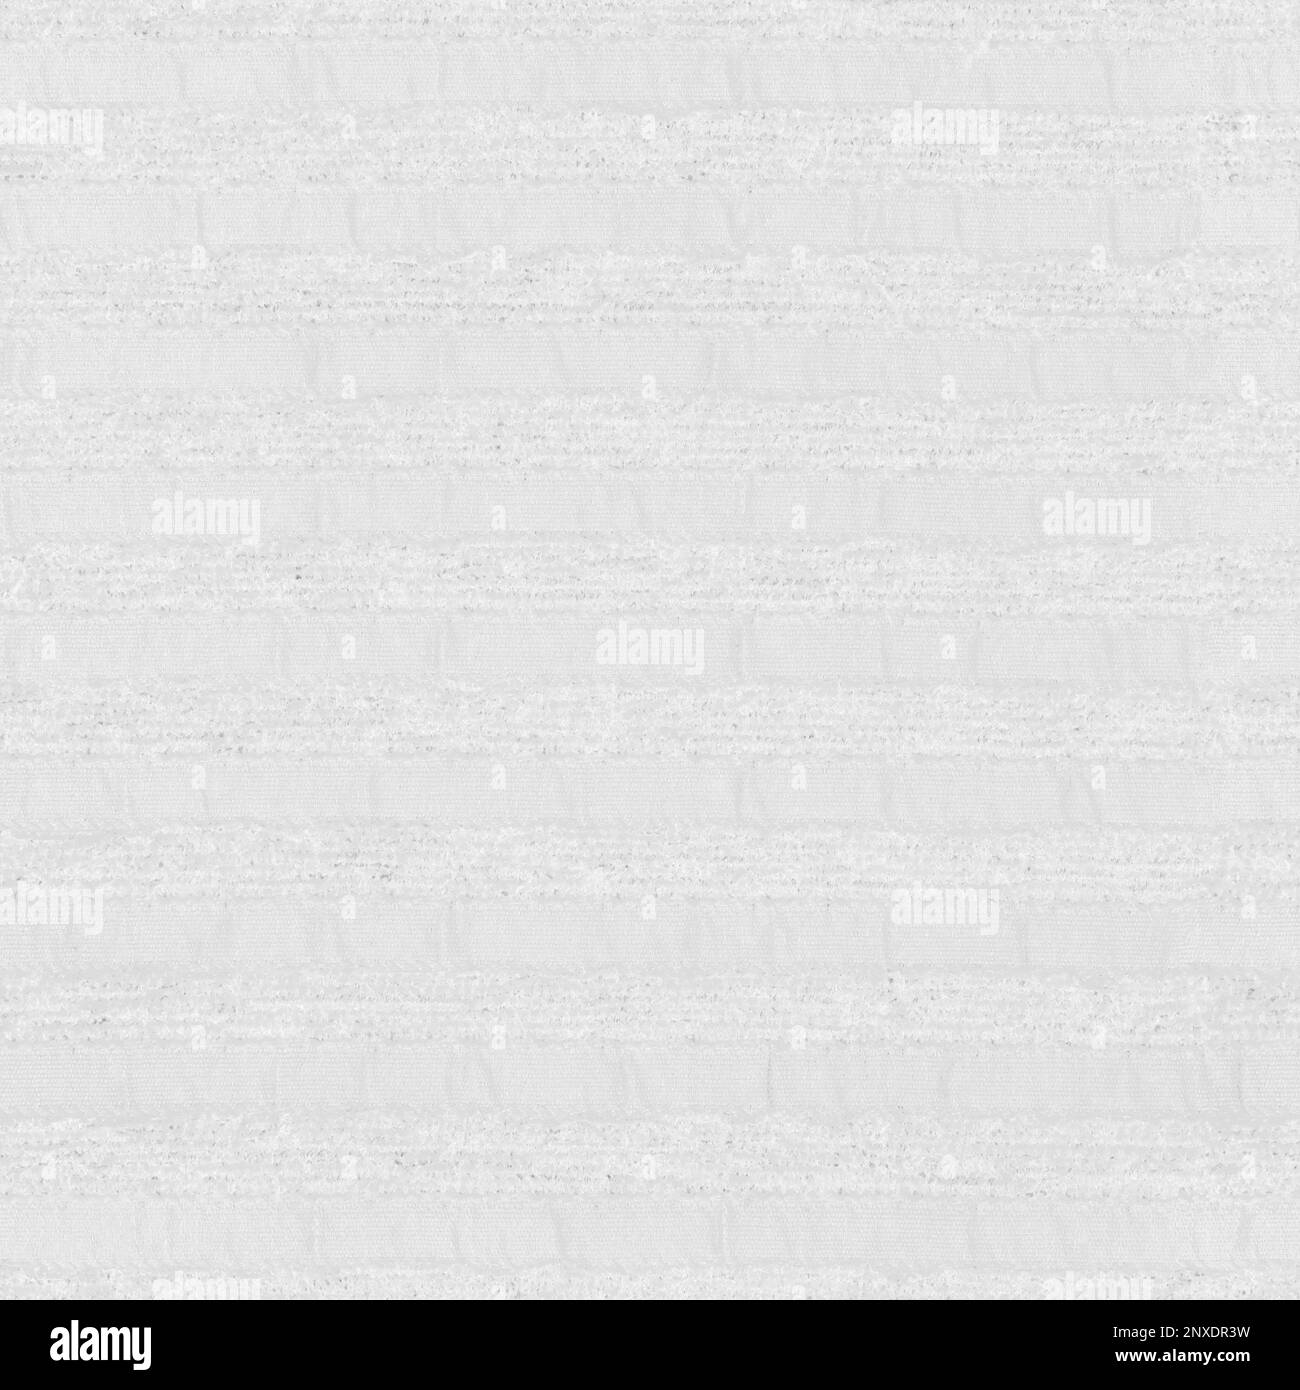 Ambient Occlusion map Texture fabric texture, AO mapping fabric pattern Stock Photo